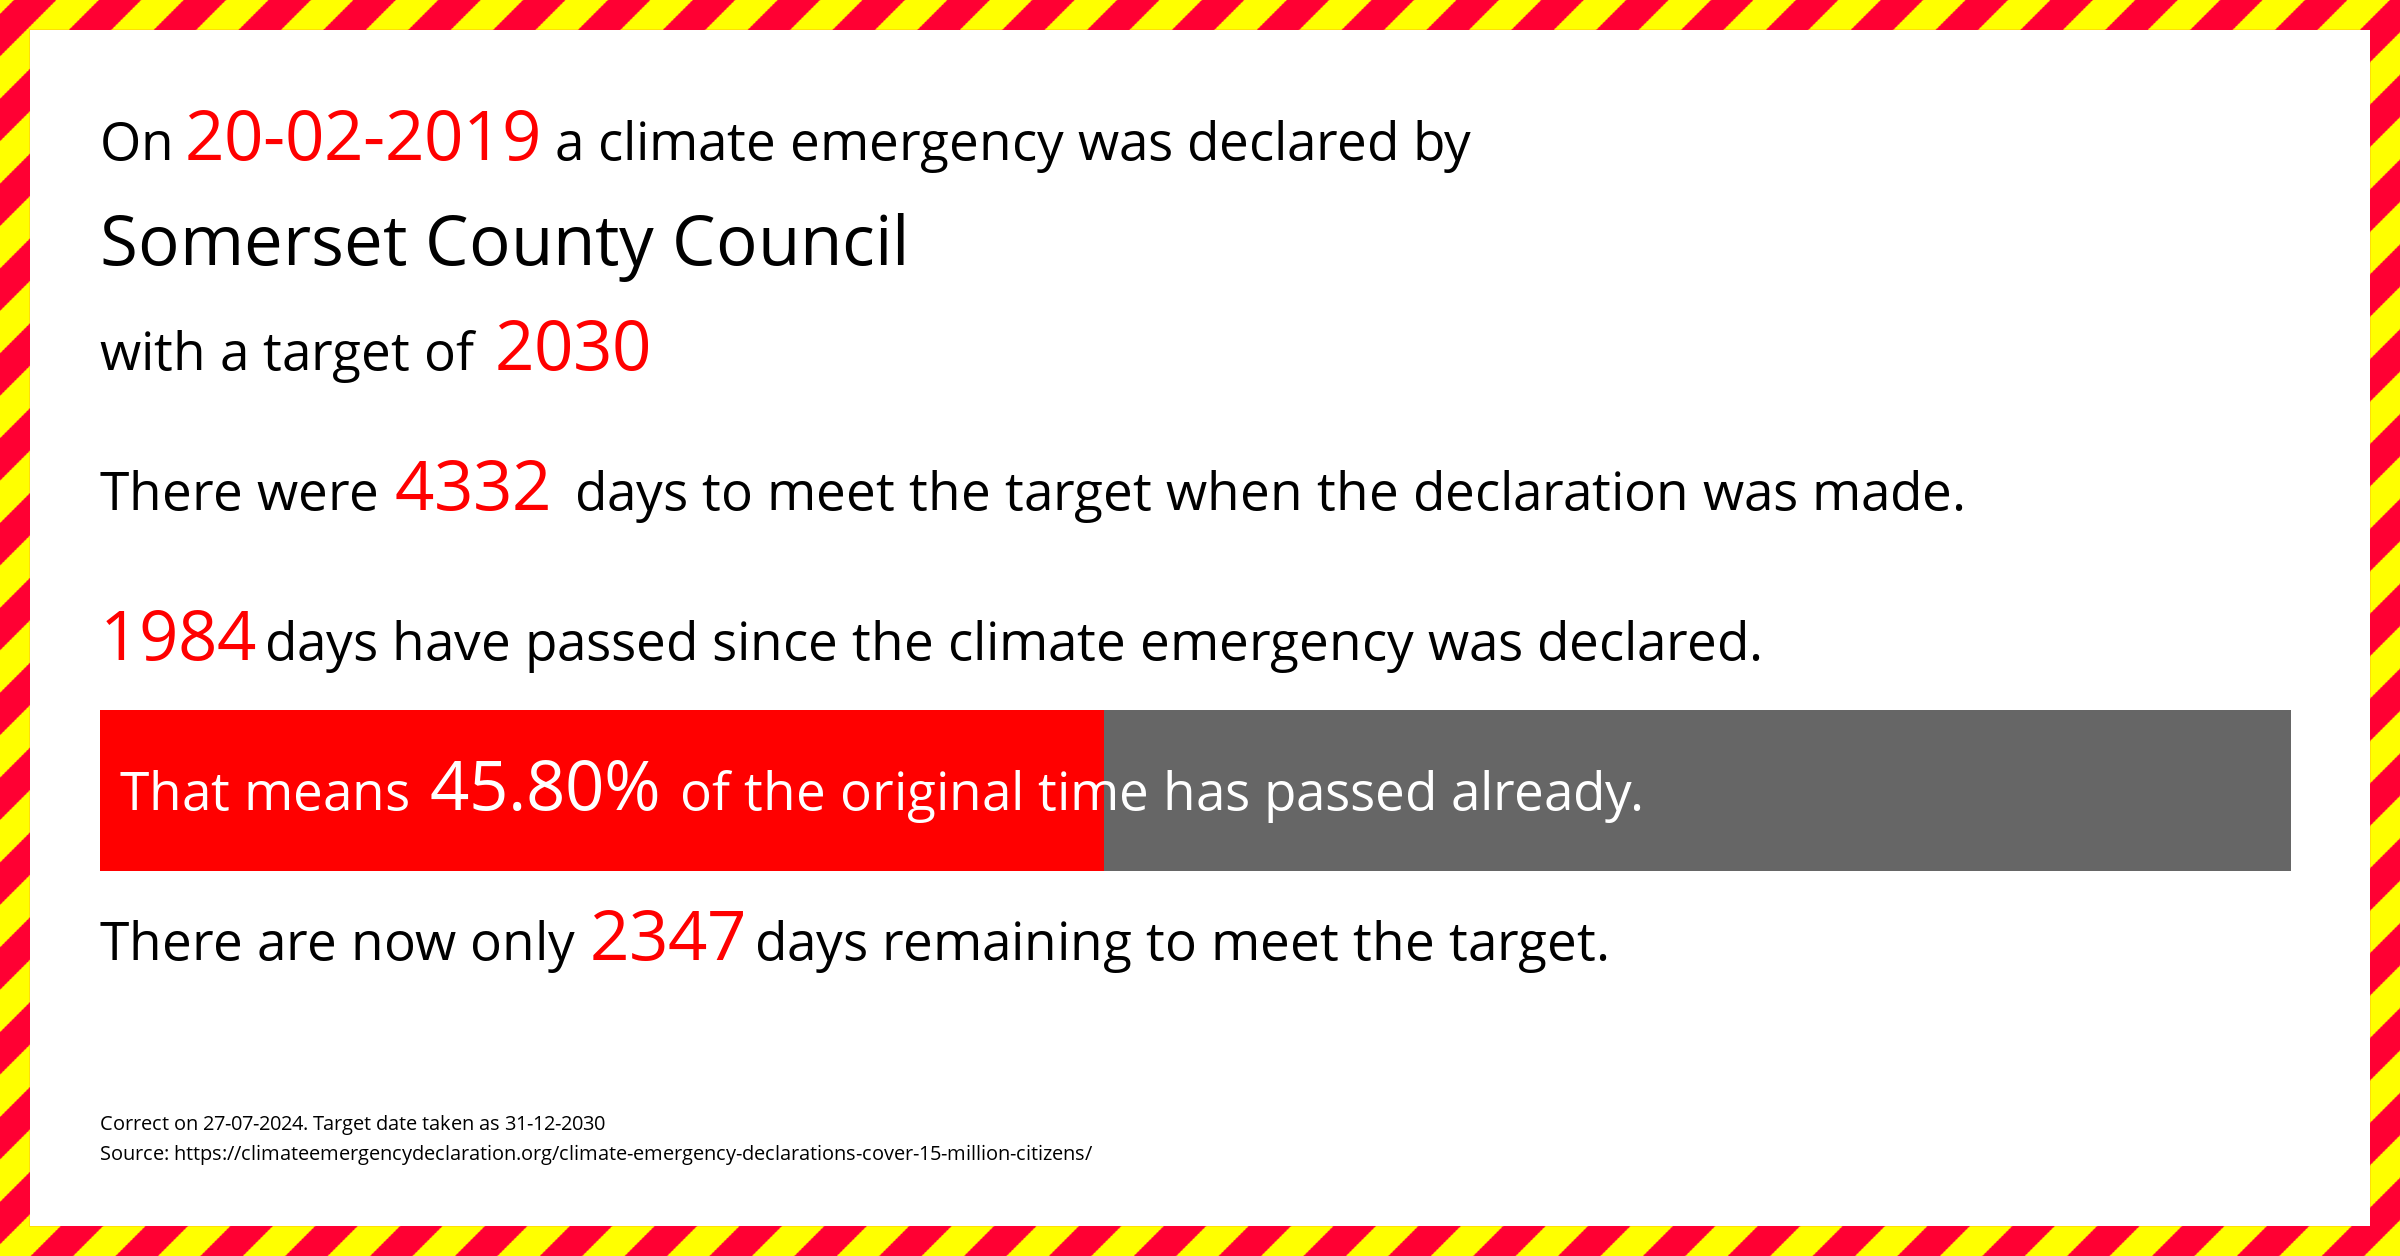 Somerset County Council declared a Climate emergency on Wednesday 20th February 2019, with a target of 2030.